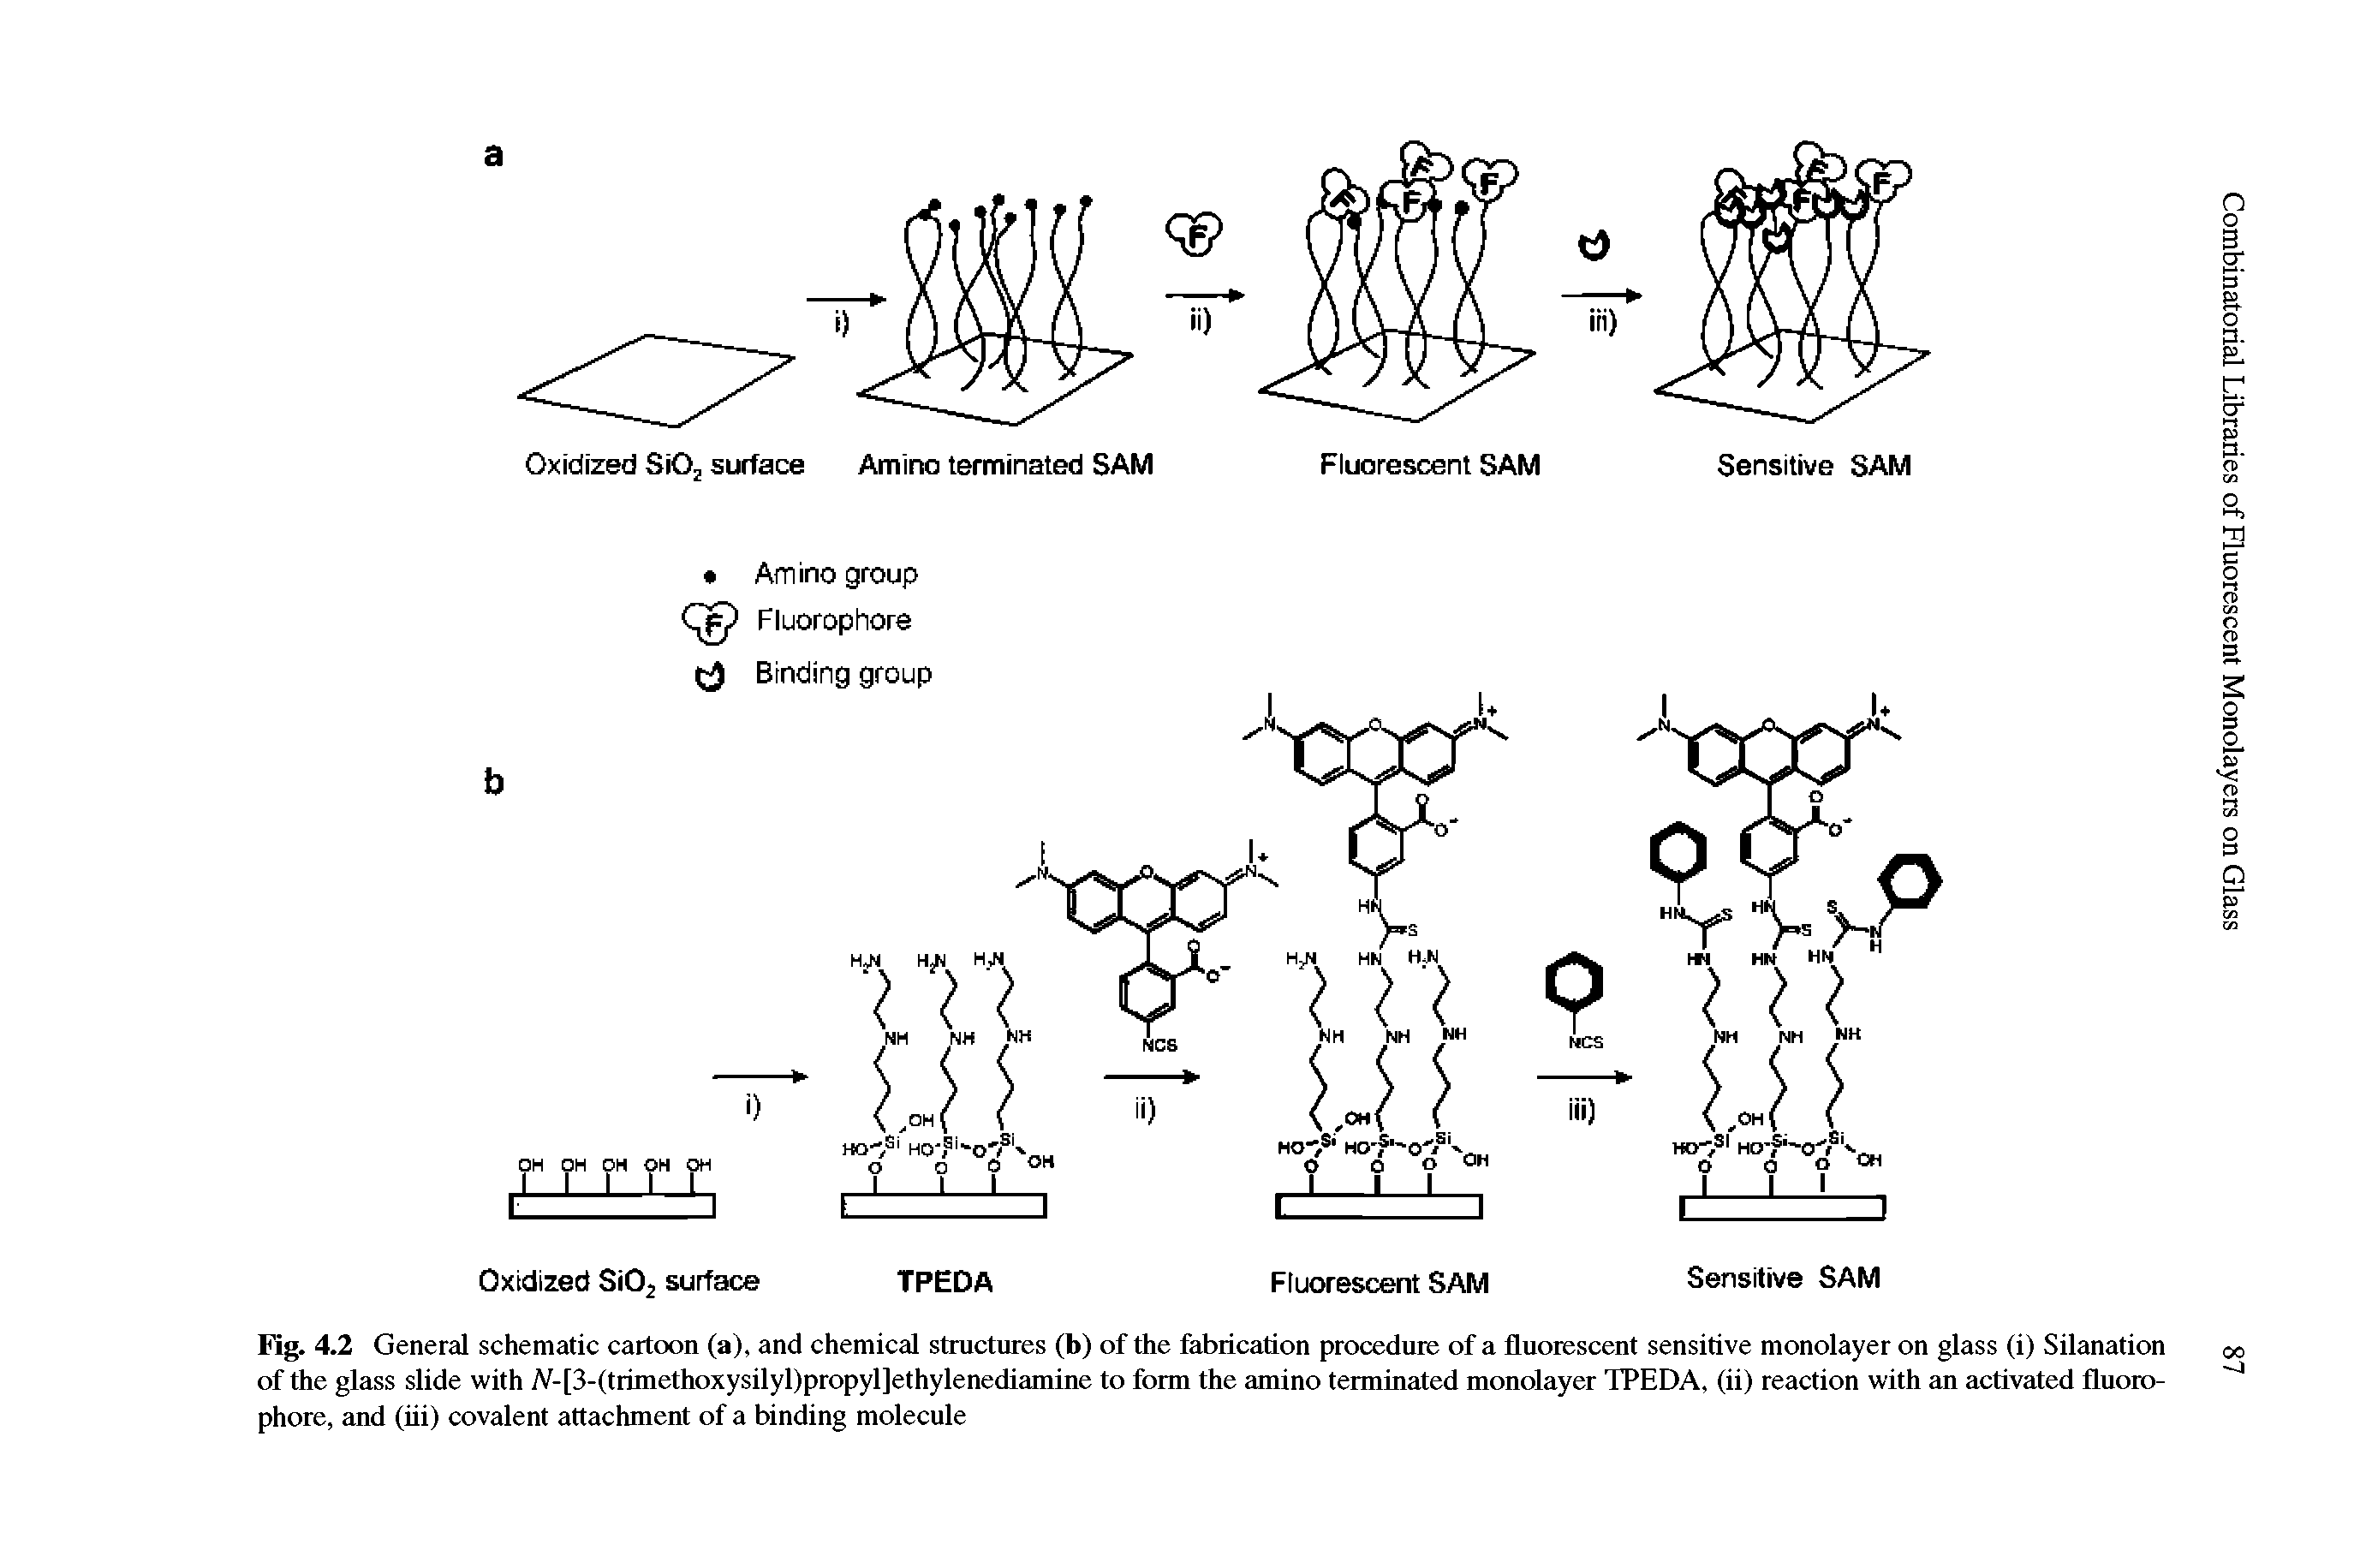 Fig. 4.2 General schematic cartoon (a), and chemical structures (b) of the fabrication procedure of a fluorescent sensitive monolayer on glass (i) Silanation of the glass slide with lV-[3-(trimethoxysilyl)propyl]ethylenediamine to form the amino terminated monolayer TPEDA, (ii) reaction with an activated fluoro-phore, and (iii) covalent attachment of a binding molecule...